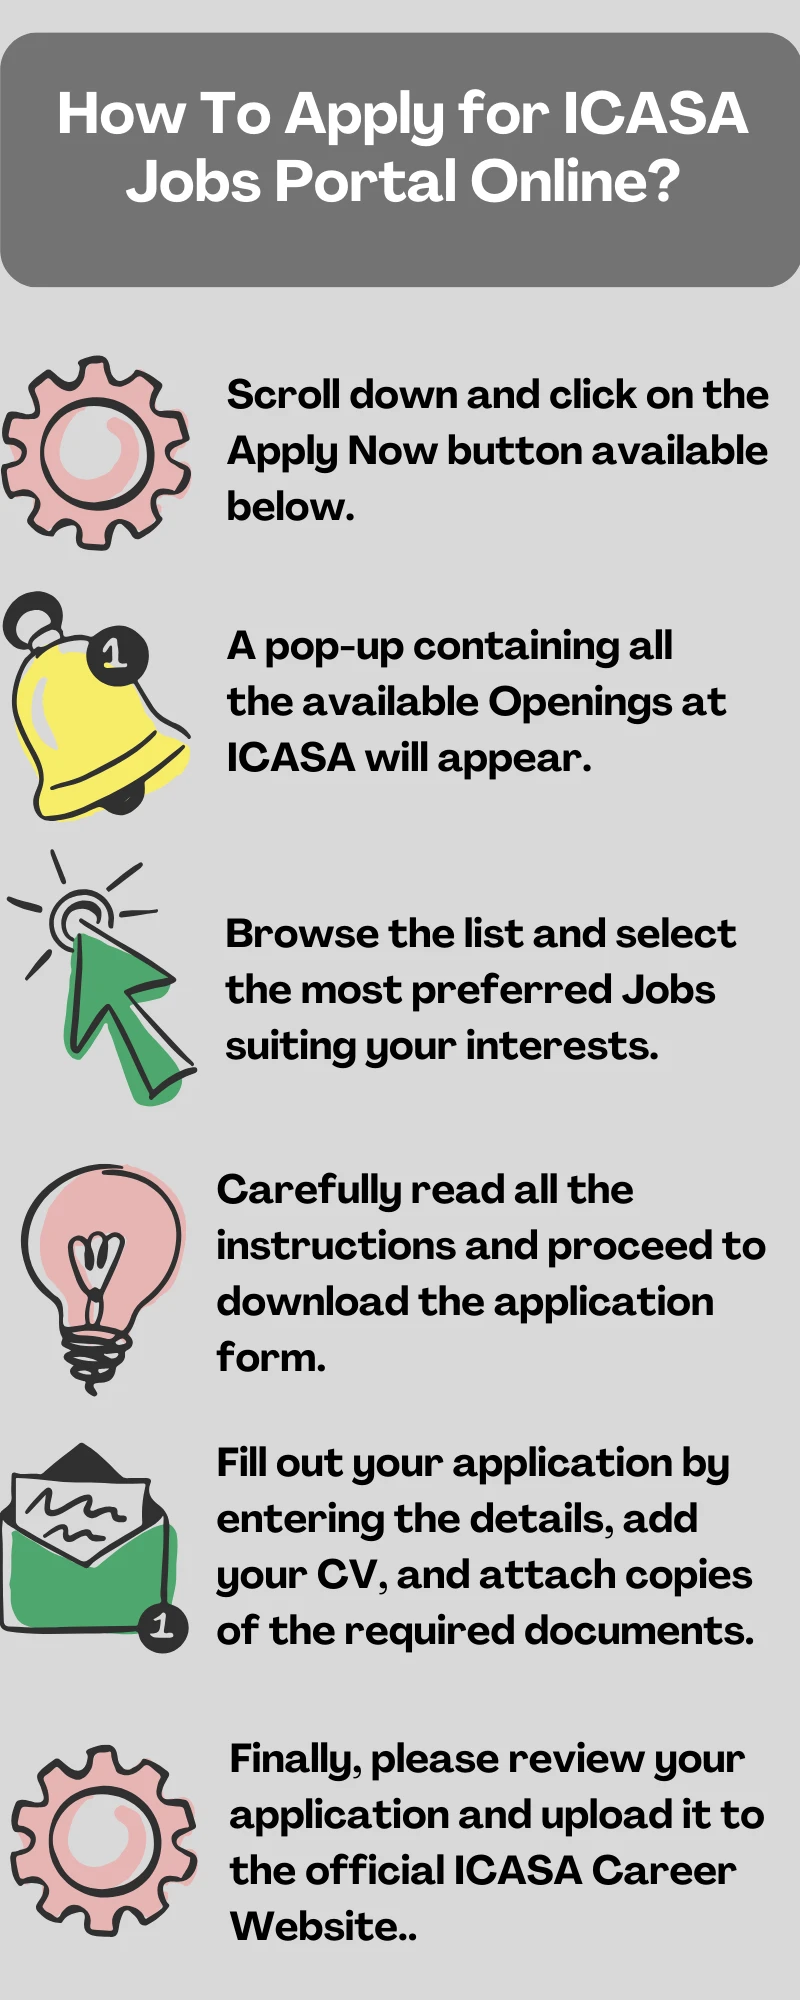 How To Apply for ICASA Jobs Portal Online?